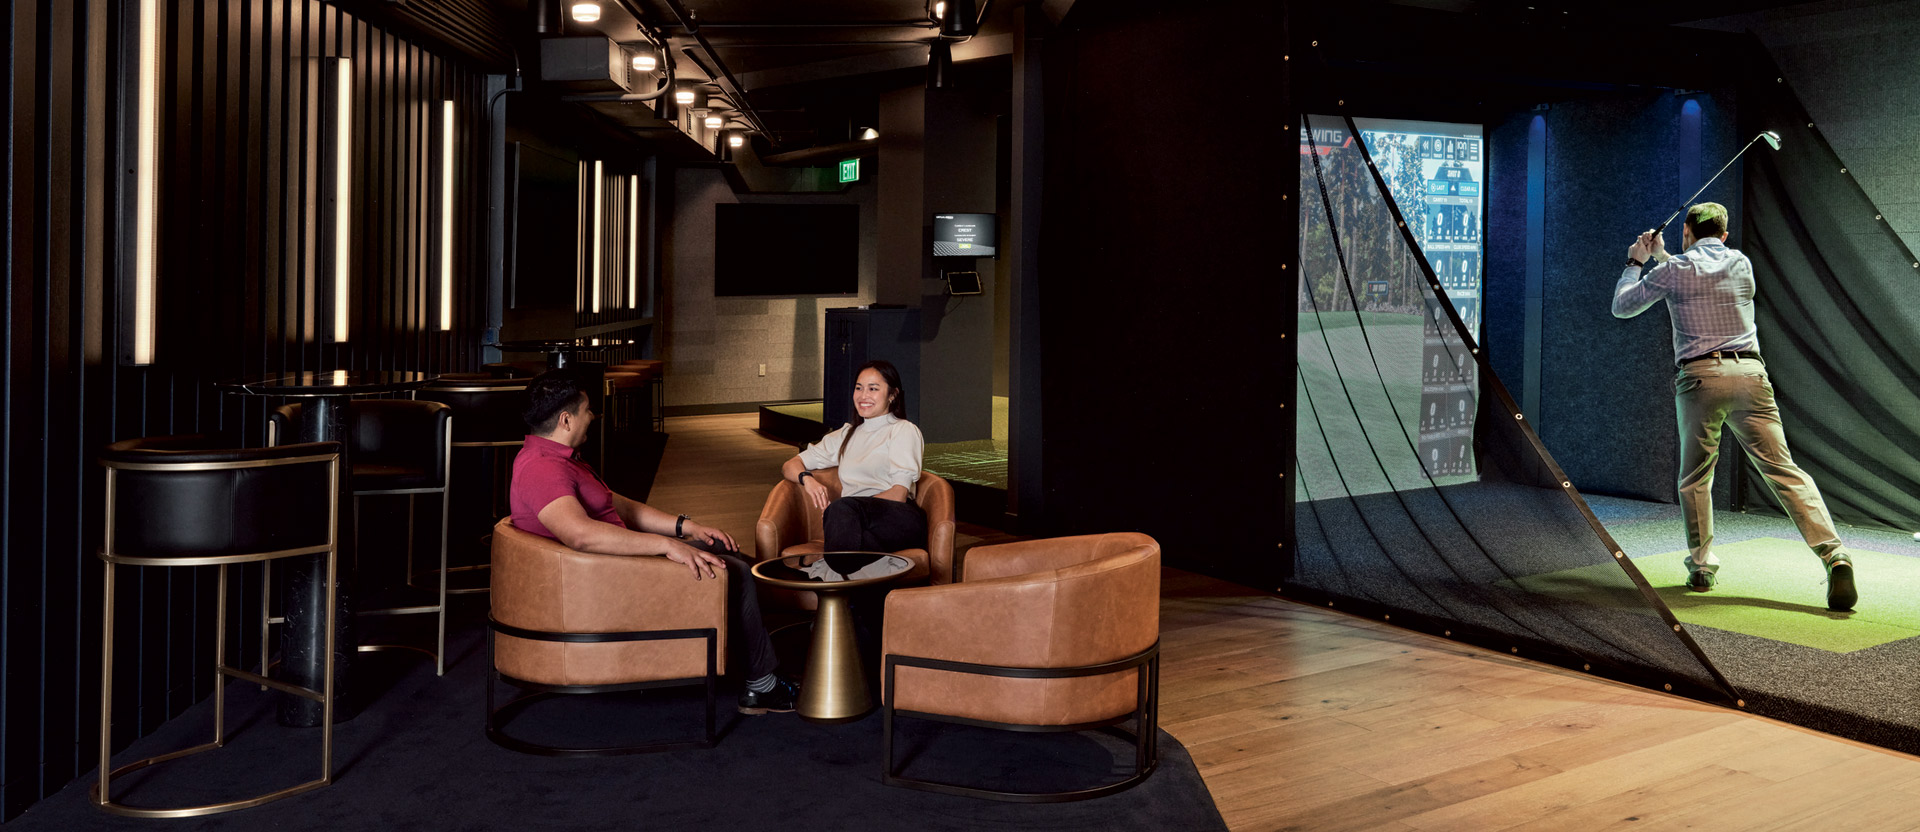 Modern urban-inspired lounge with plush leather seating and industrial-style lighting against a backdrop of dark hues, complemented by a vibrant, full-wall golf simulation screen, offering a dynamic contrast and engaging recreational feature within the space.